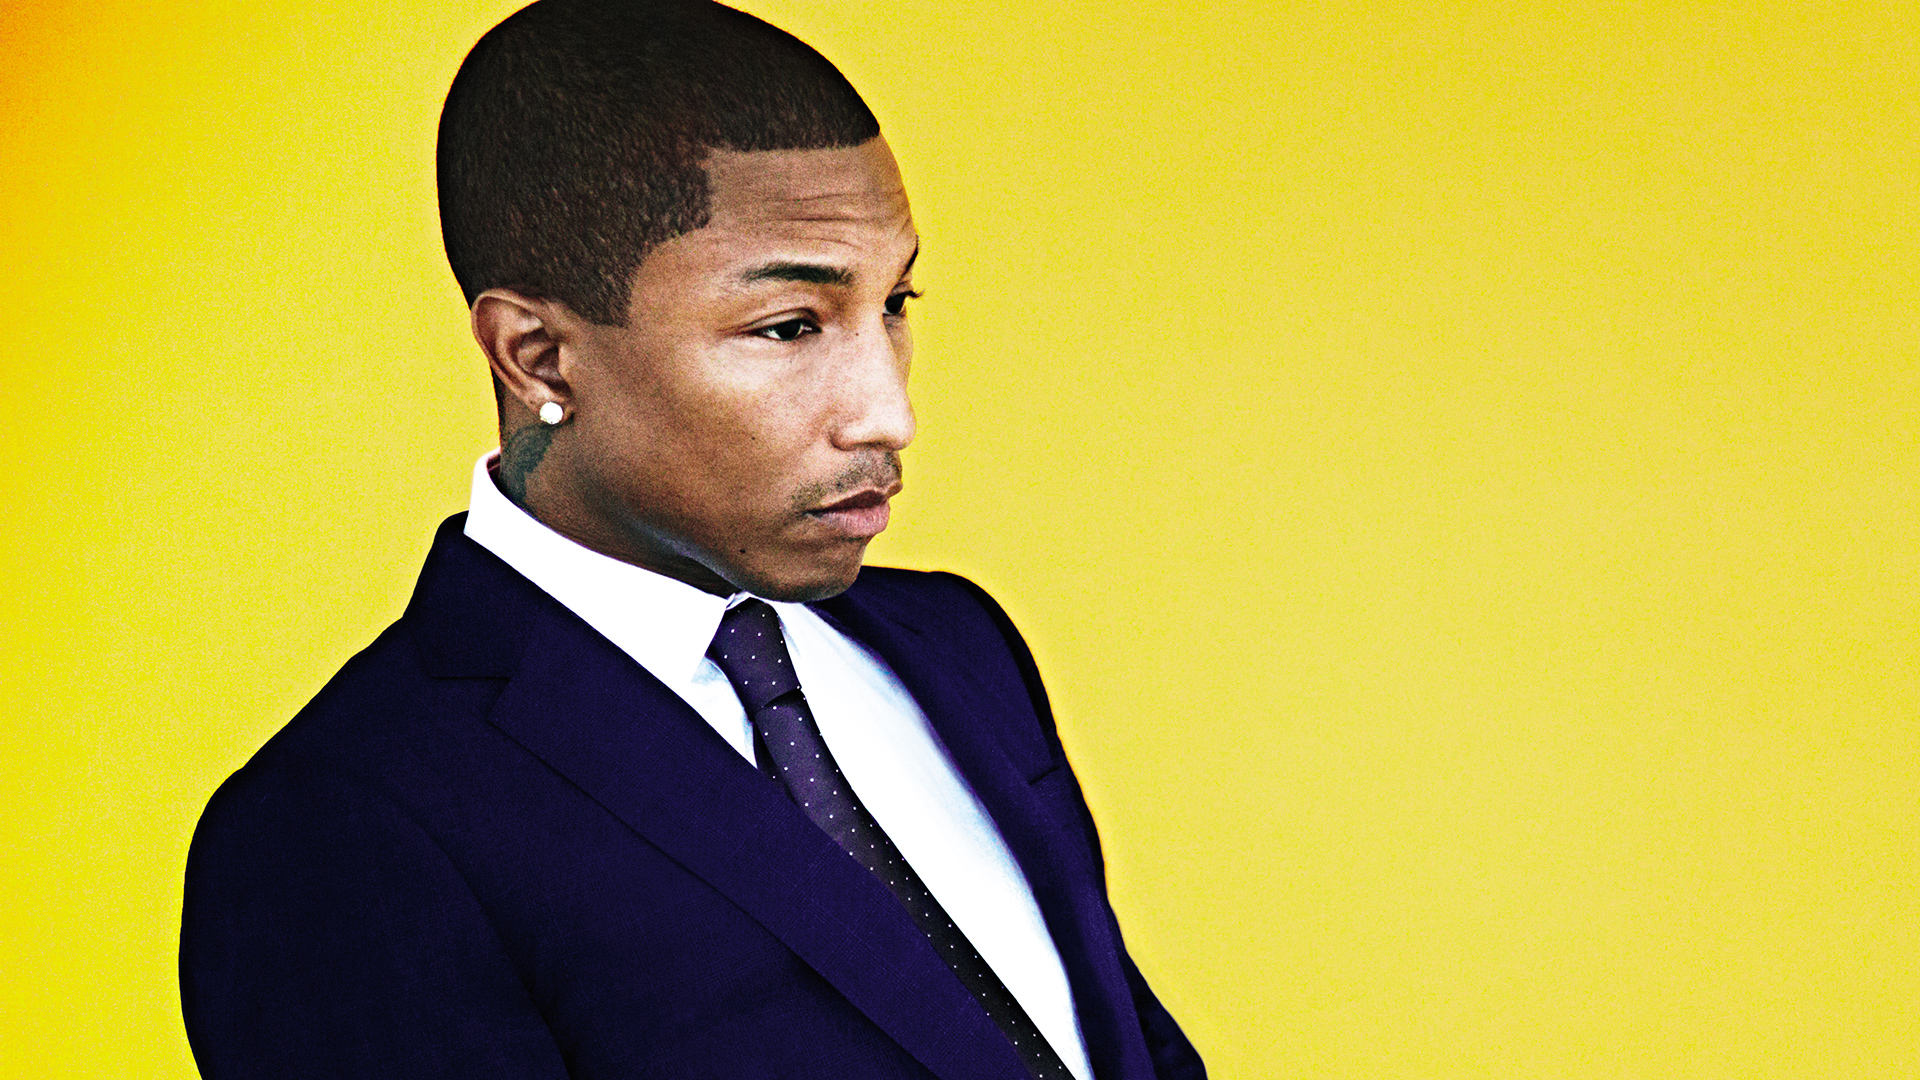 Free Download Pharrell Williams Wallpapers Wallpaper High Images, Photos, Reviews